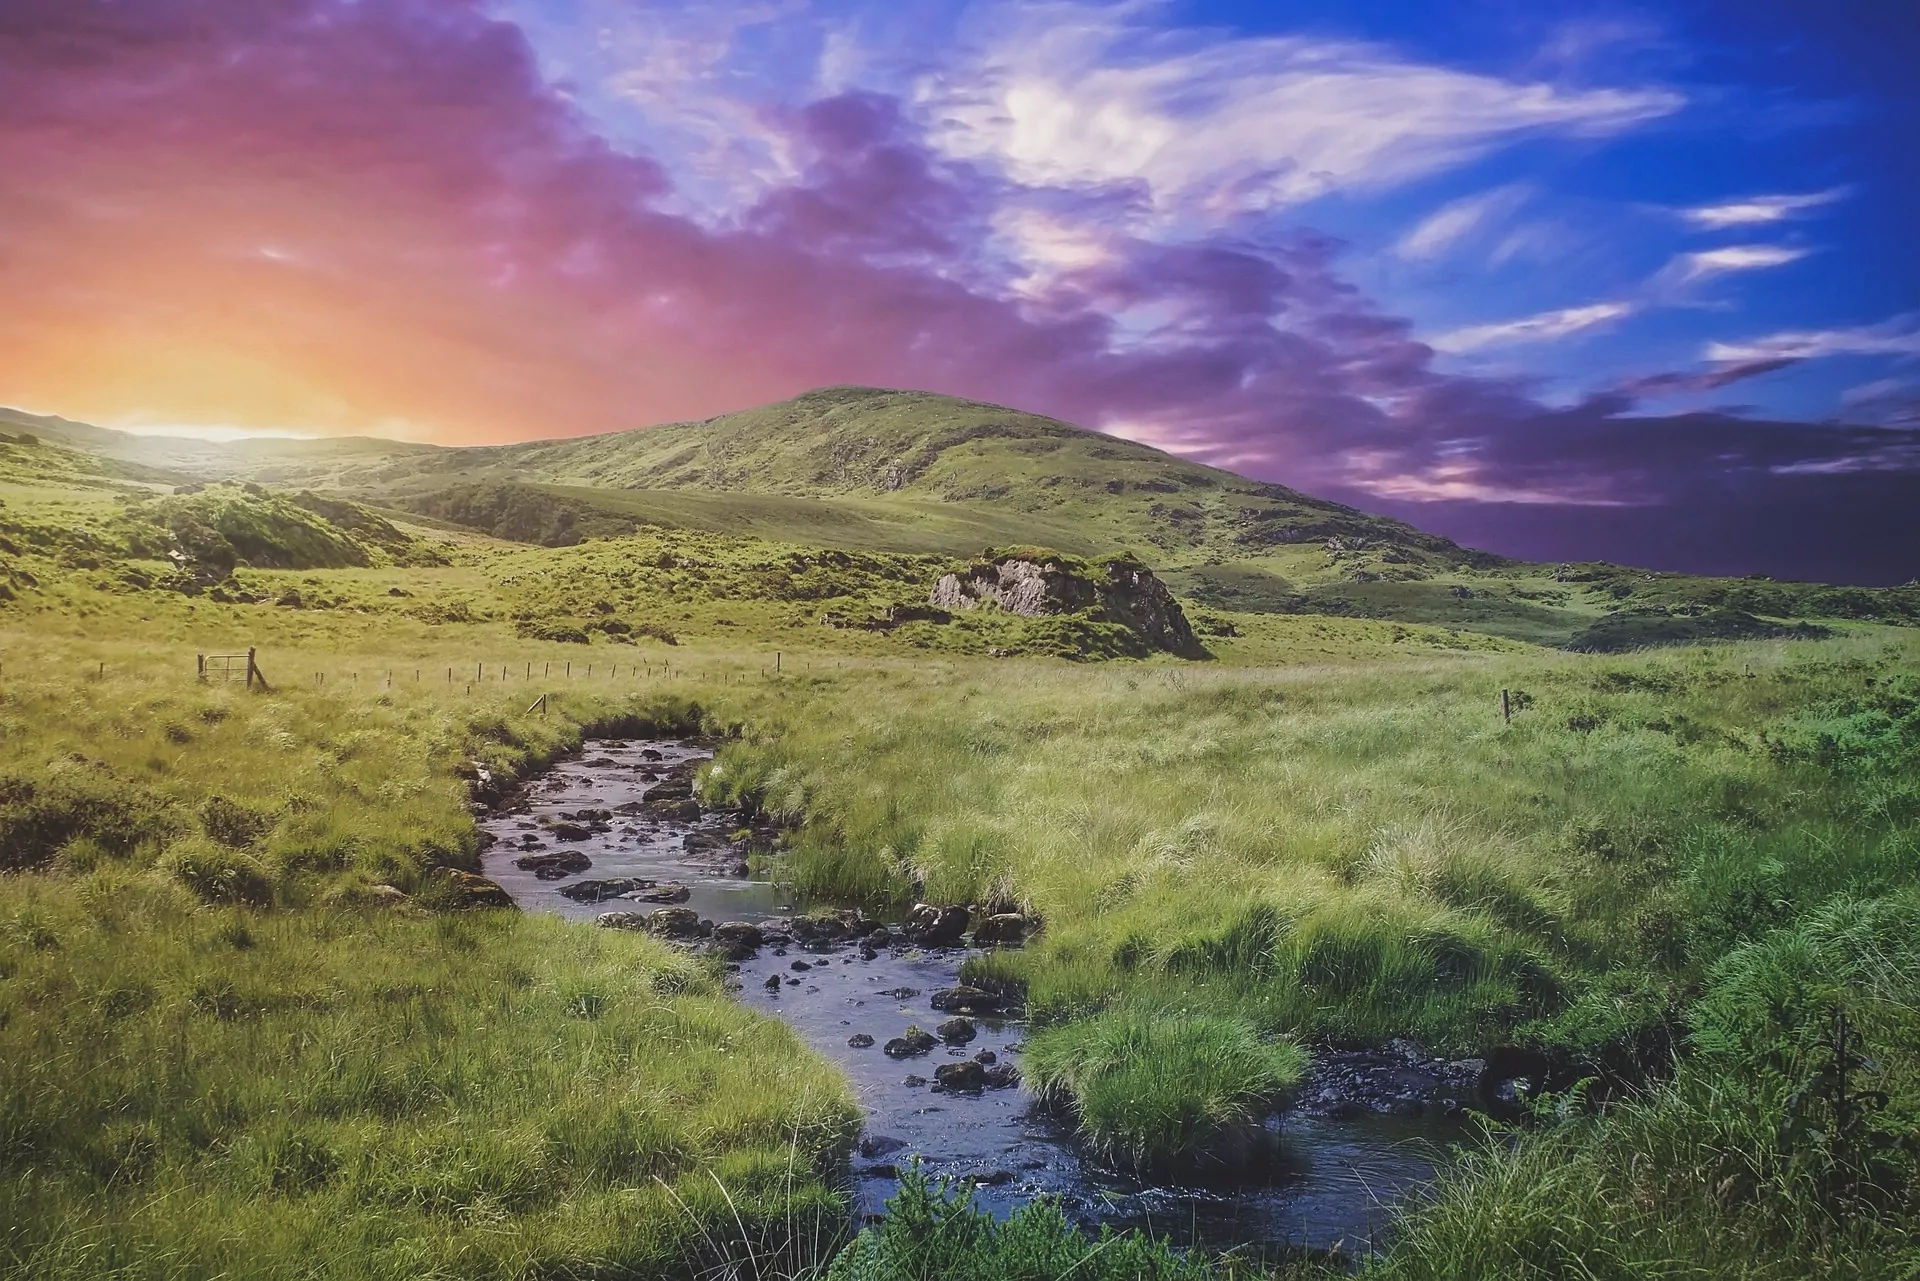 An image of a sun setting over the English countryside. The rich array of colours marbled across the evening sky is beautiful. A stream cuts down the centre of the frame making a calm and tranquil scene. David Attenborough series: Wild Isles.